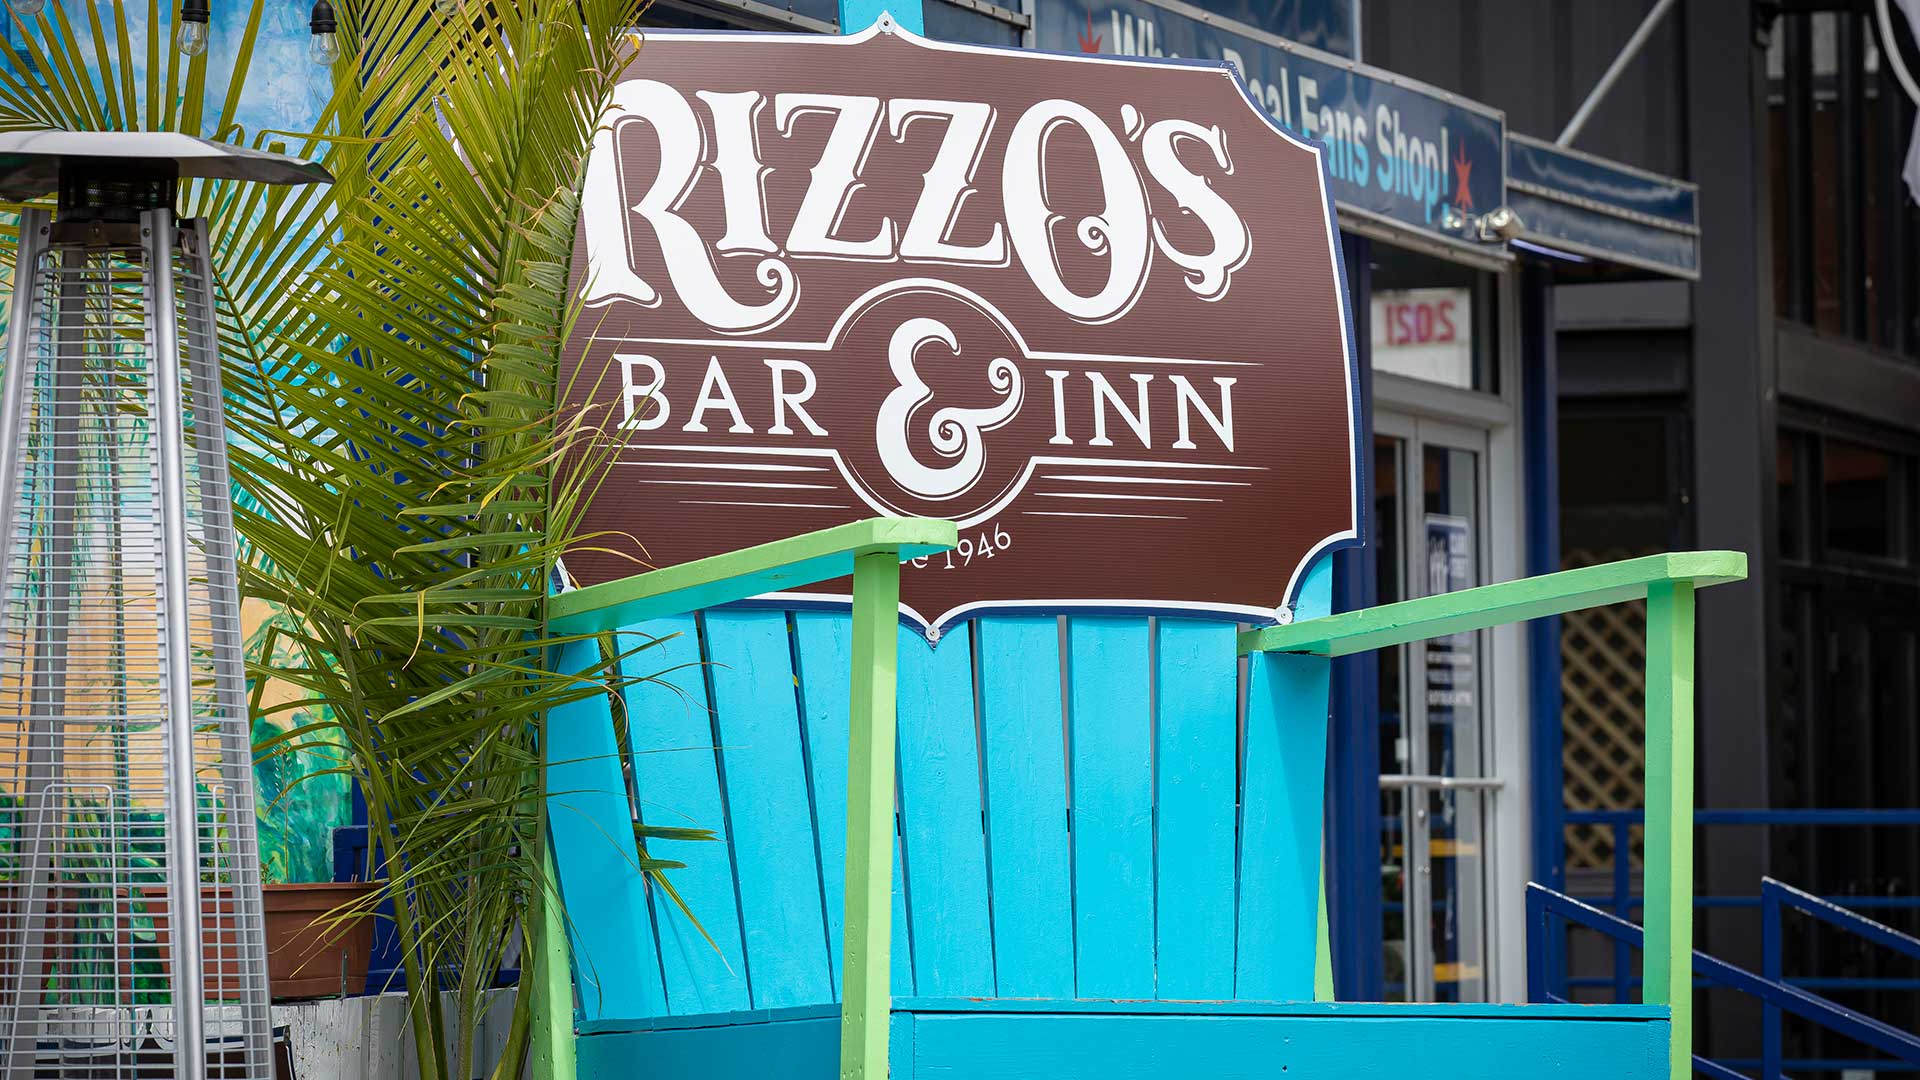 An over-sized chair with a bar sign on it in front of bar.